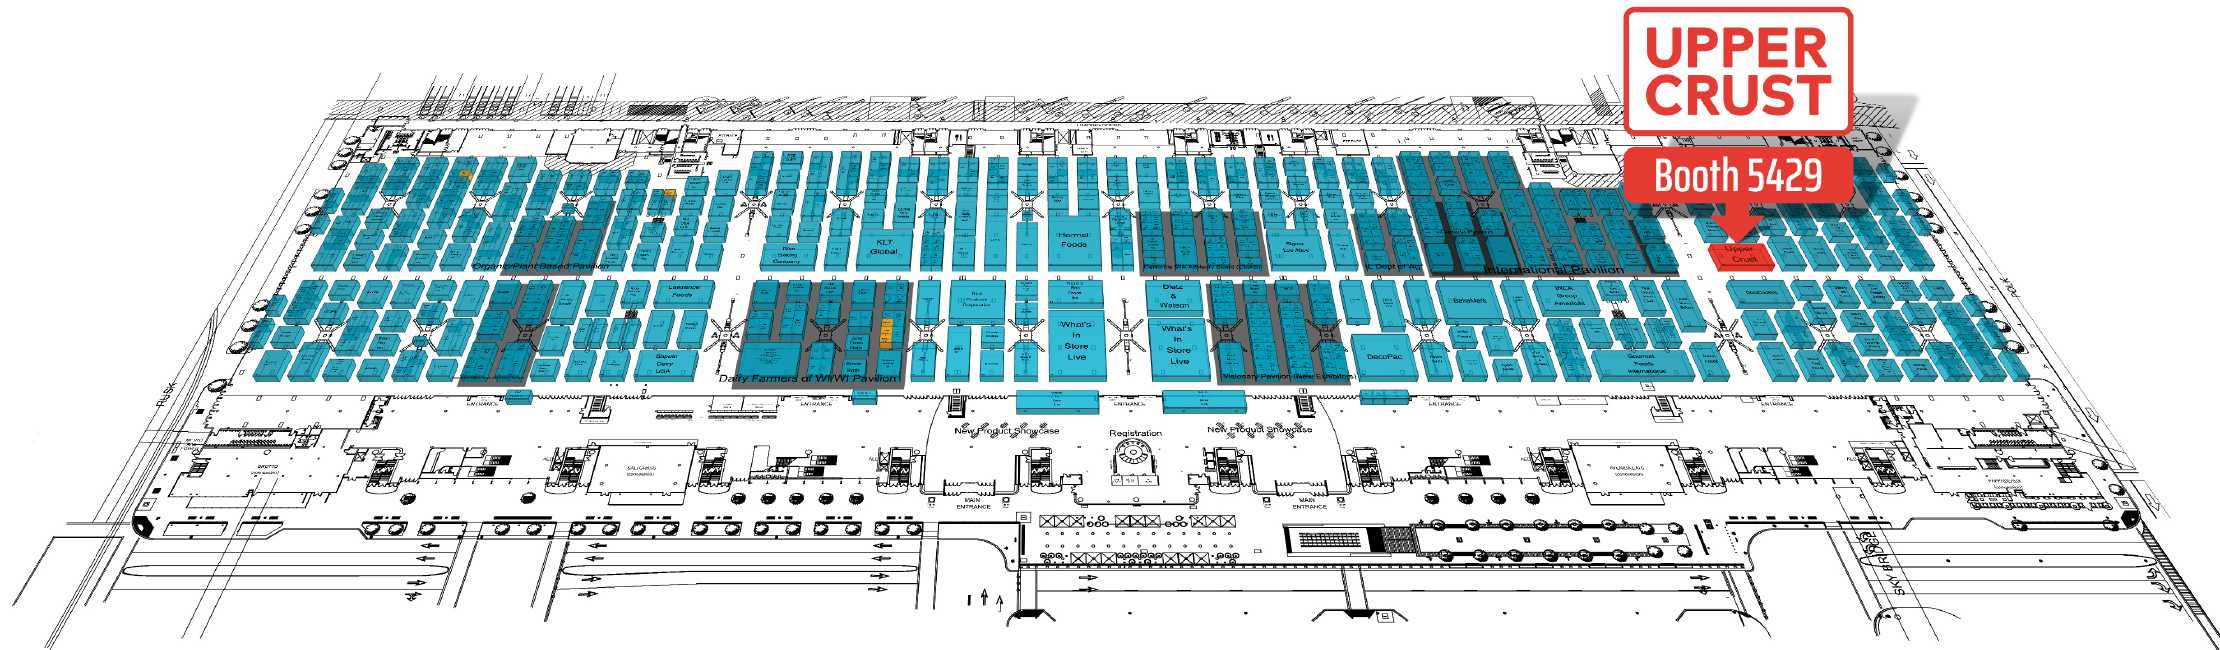 IDDBA 2024 exhibitor map with Upper Crust booth 5429 highlighted